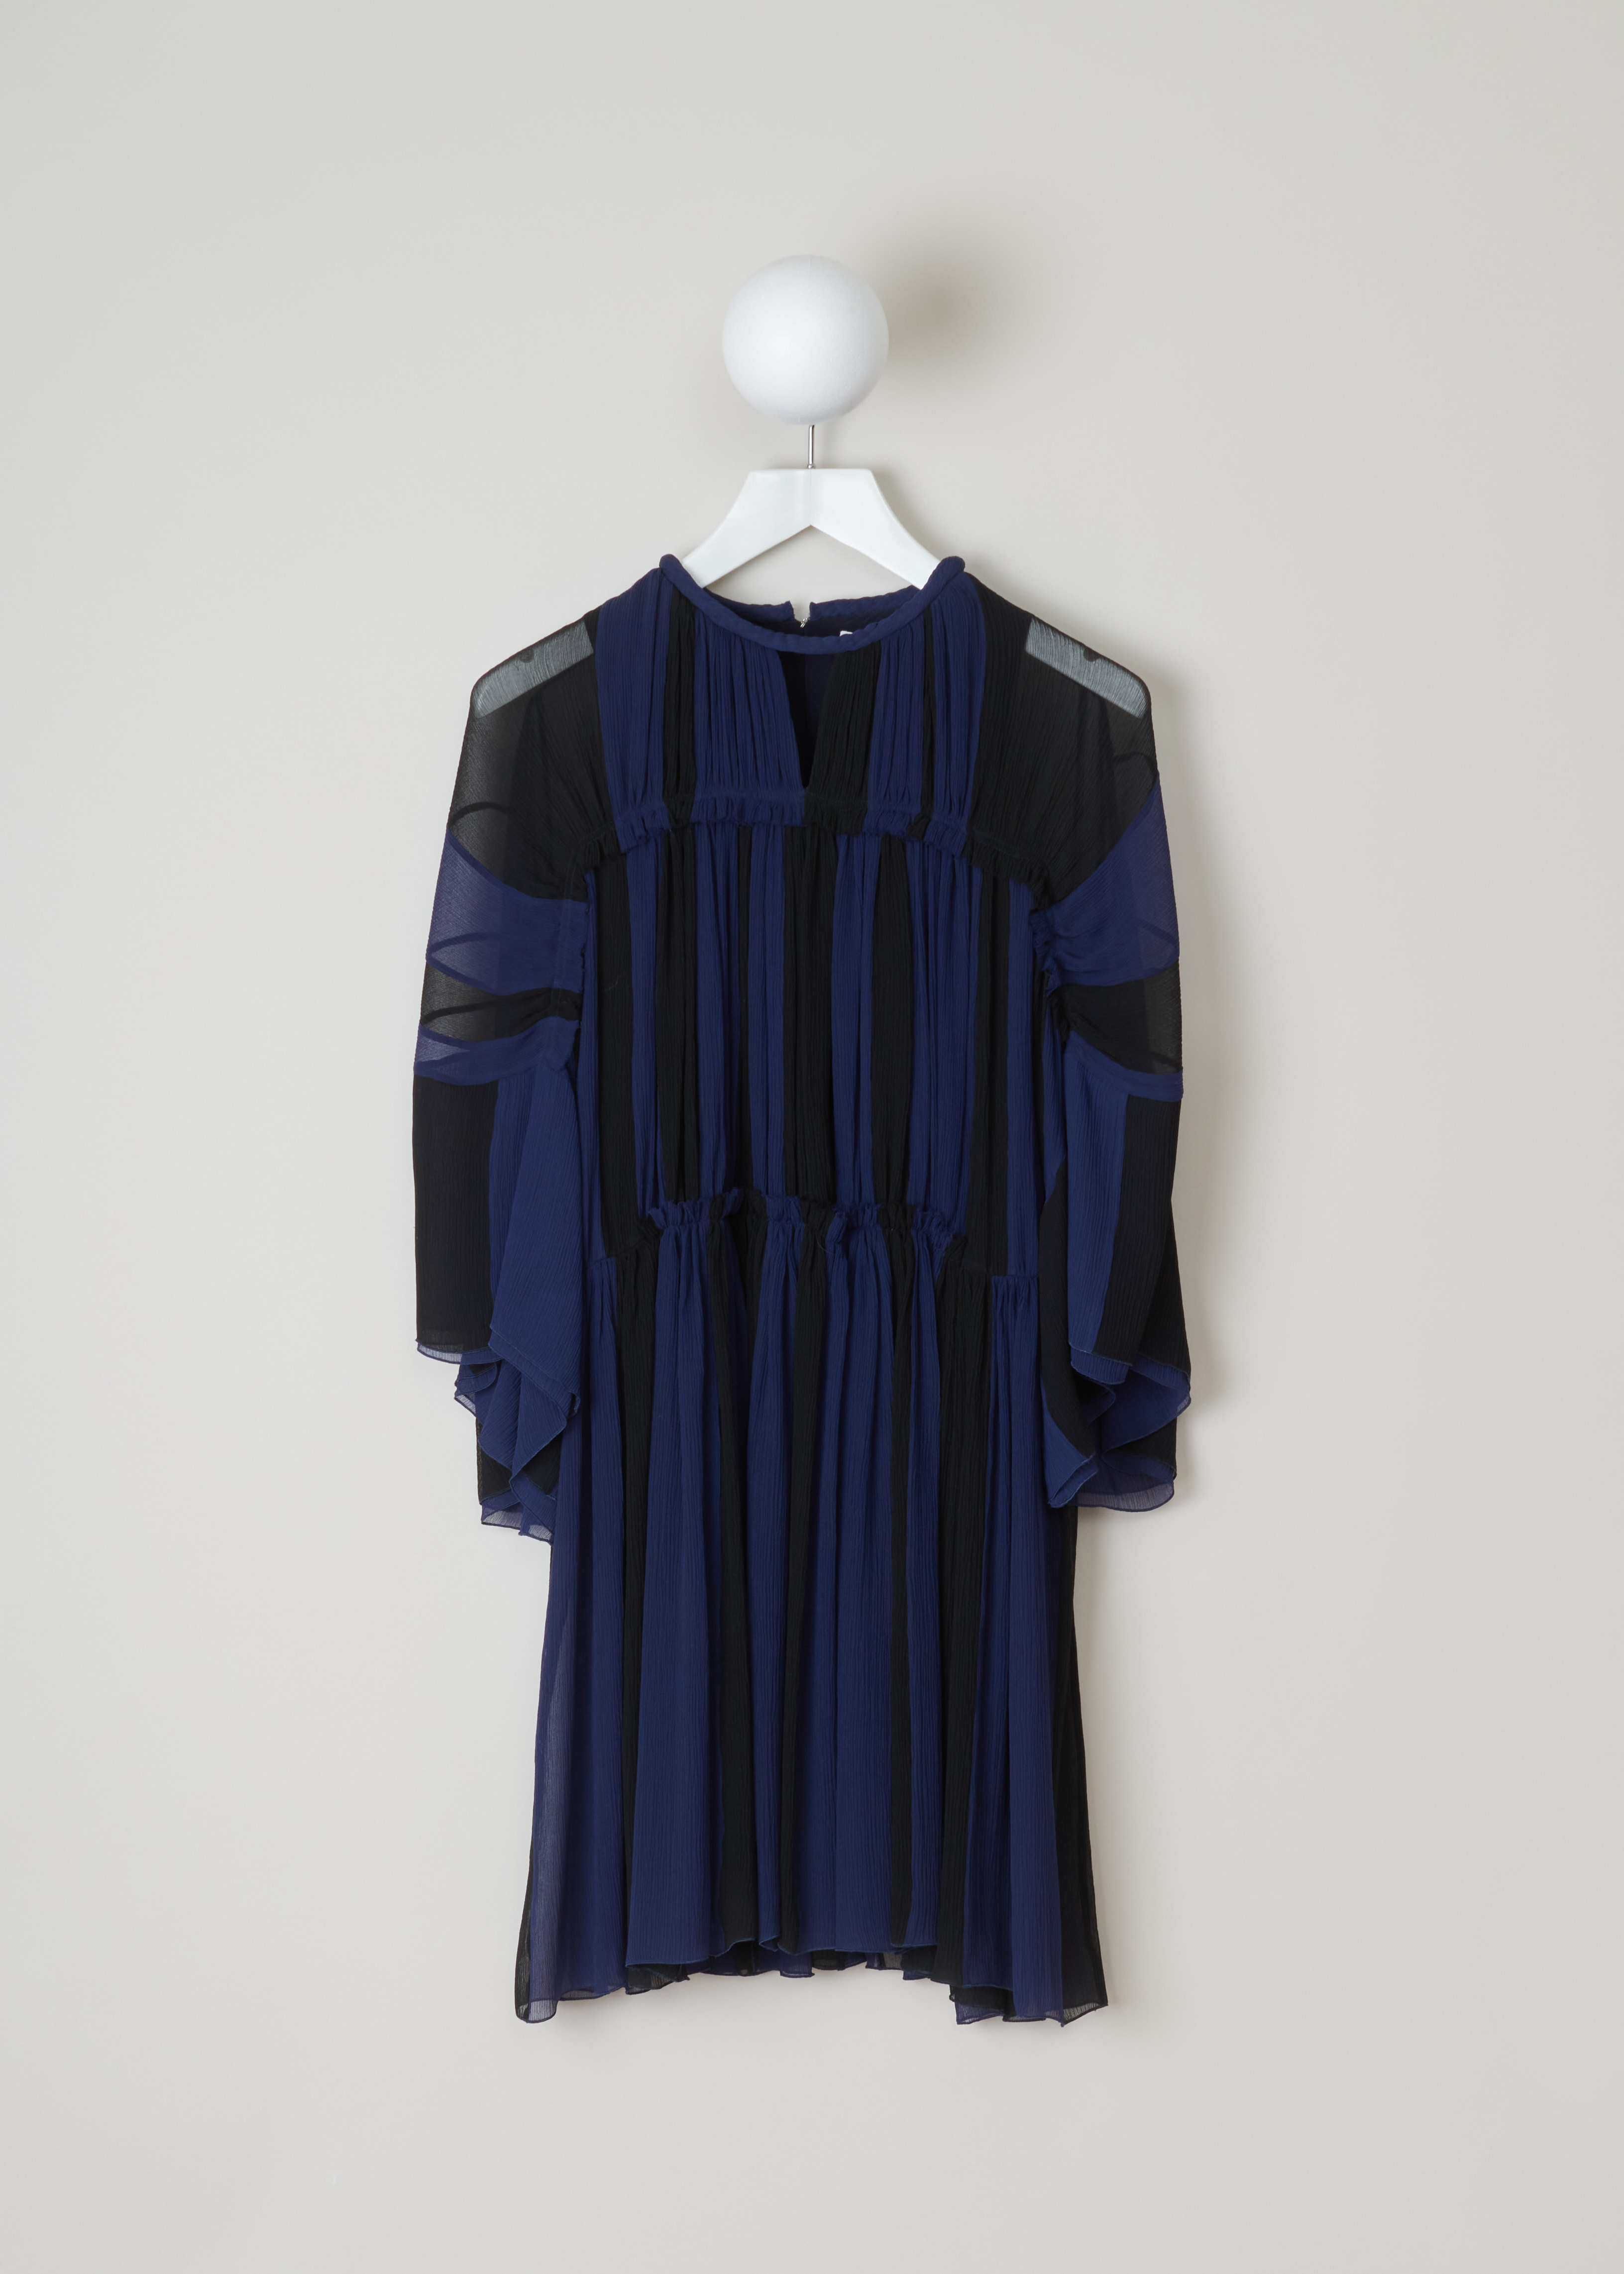 ChloÃ© Gathered slik crepe dress CHC19ARO37006925_925_Black_Blue front. This chic silk crepe dress has a blue and black vertically striped pattern. A gathered round neckline and ruffled sheer long sleeves. A ruffled waist and flared gathered midi skirt. 